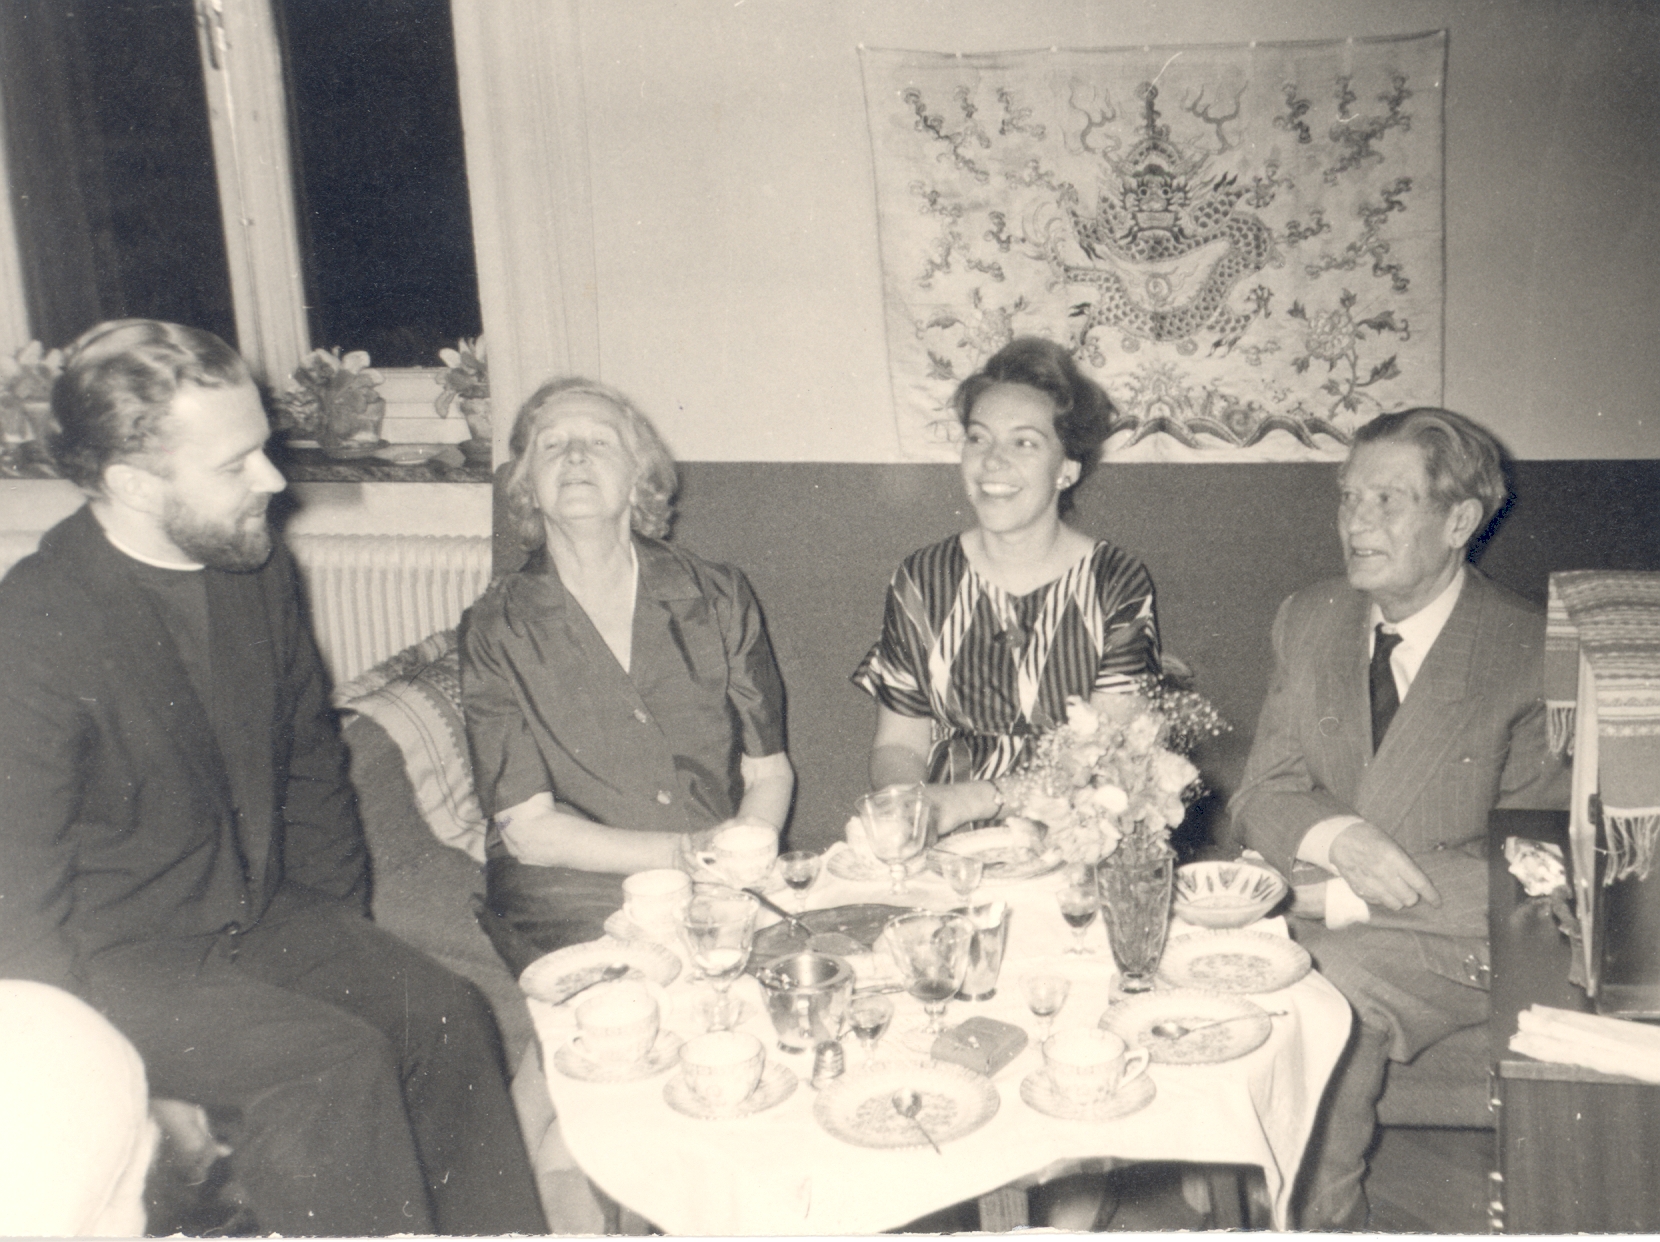 Vello Salo, Marie Under, Astrid Ivask and Johannes Aavik